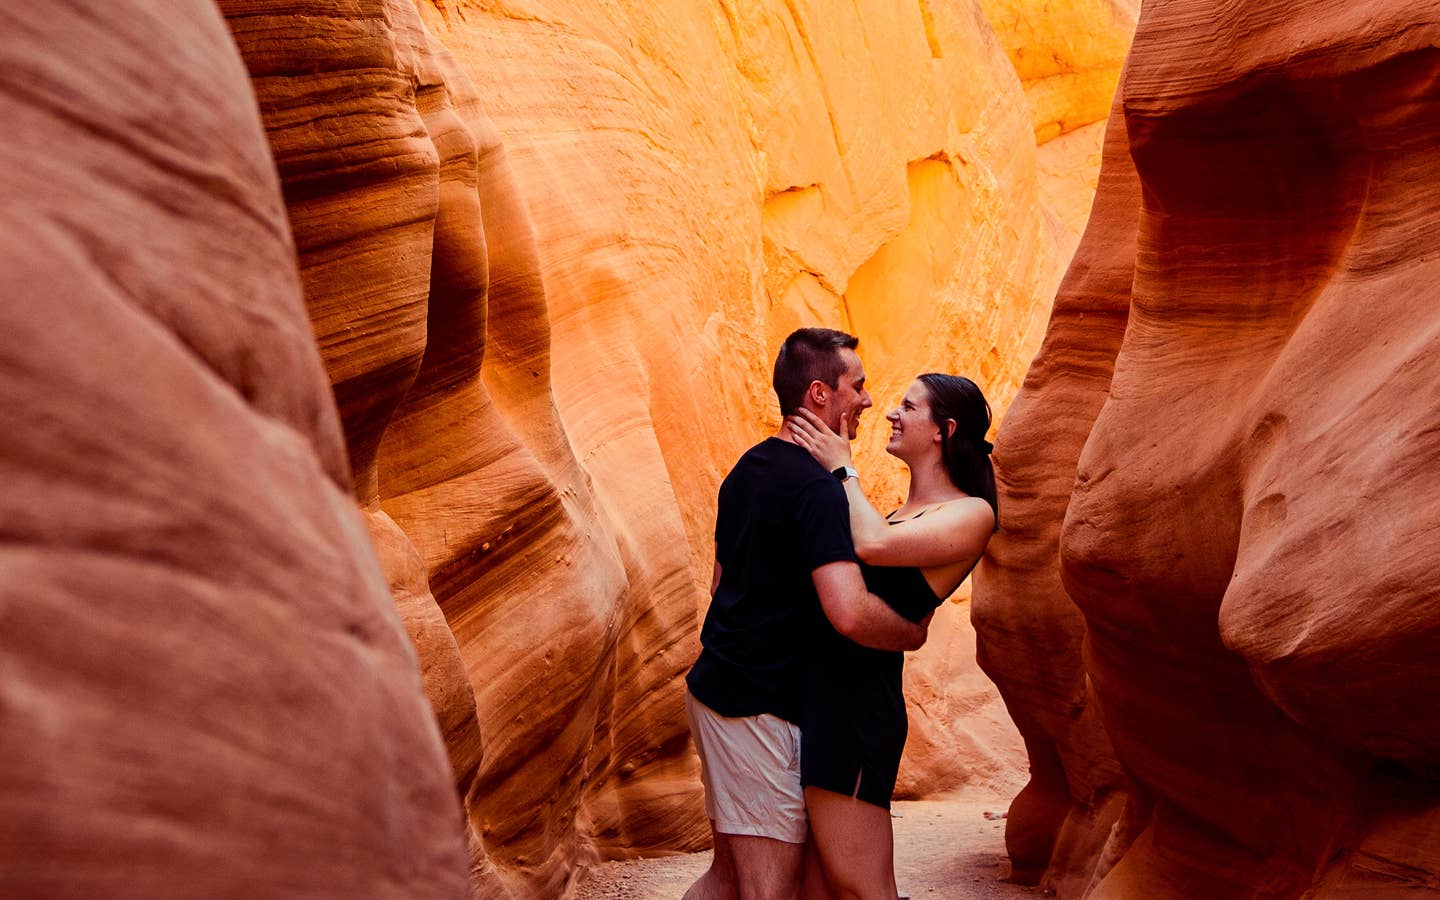 A man and woman wearing black outfits embrace in a red rock formation.